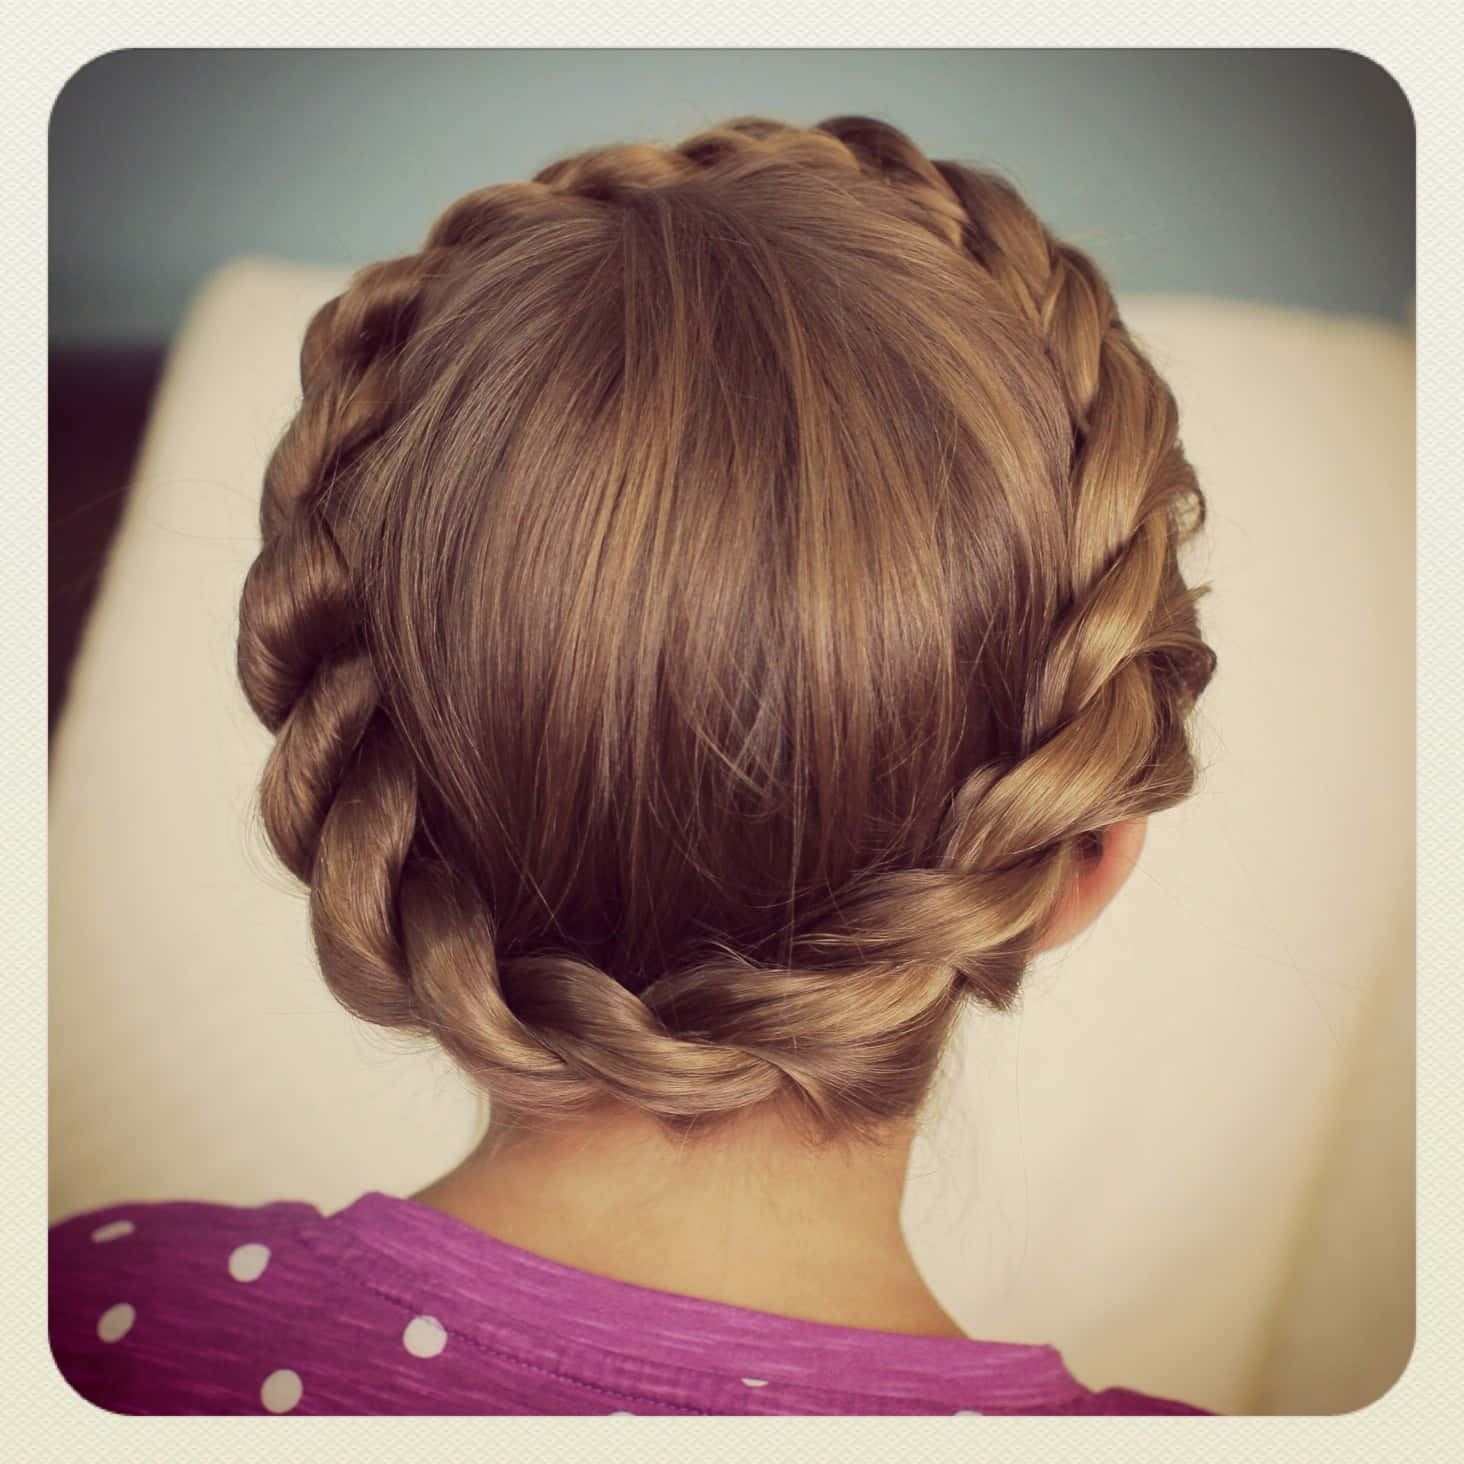 Crown Braid Cute Hairstyle Picture